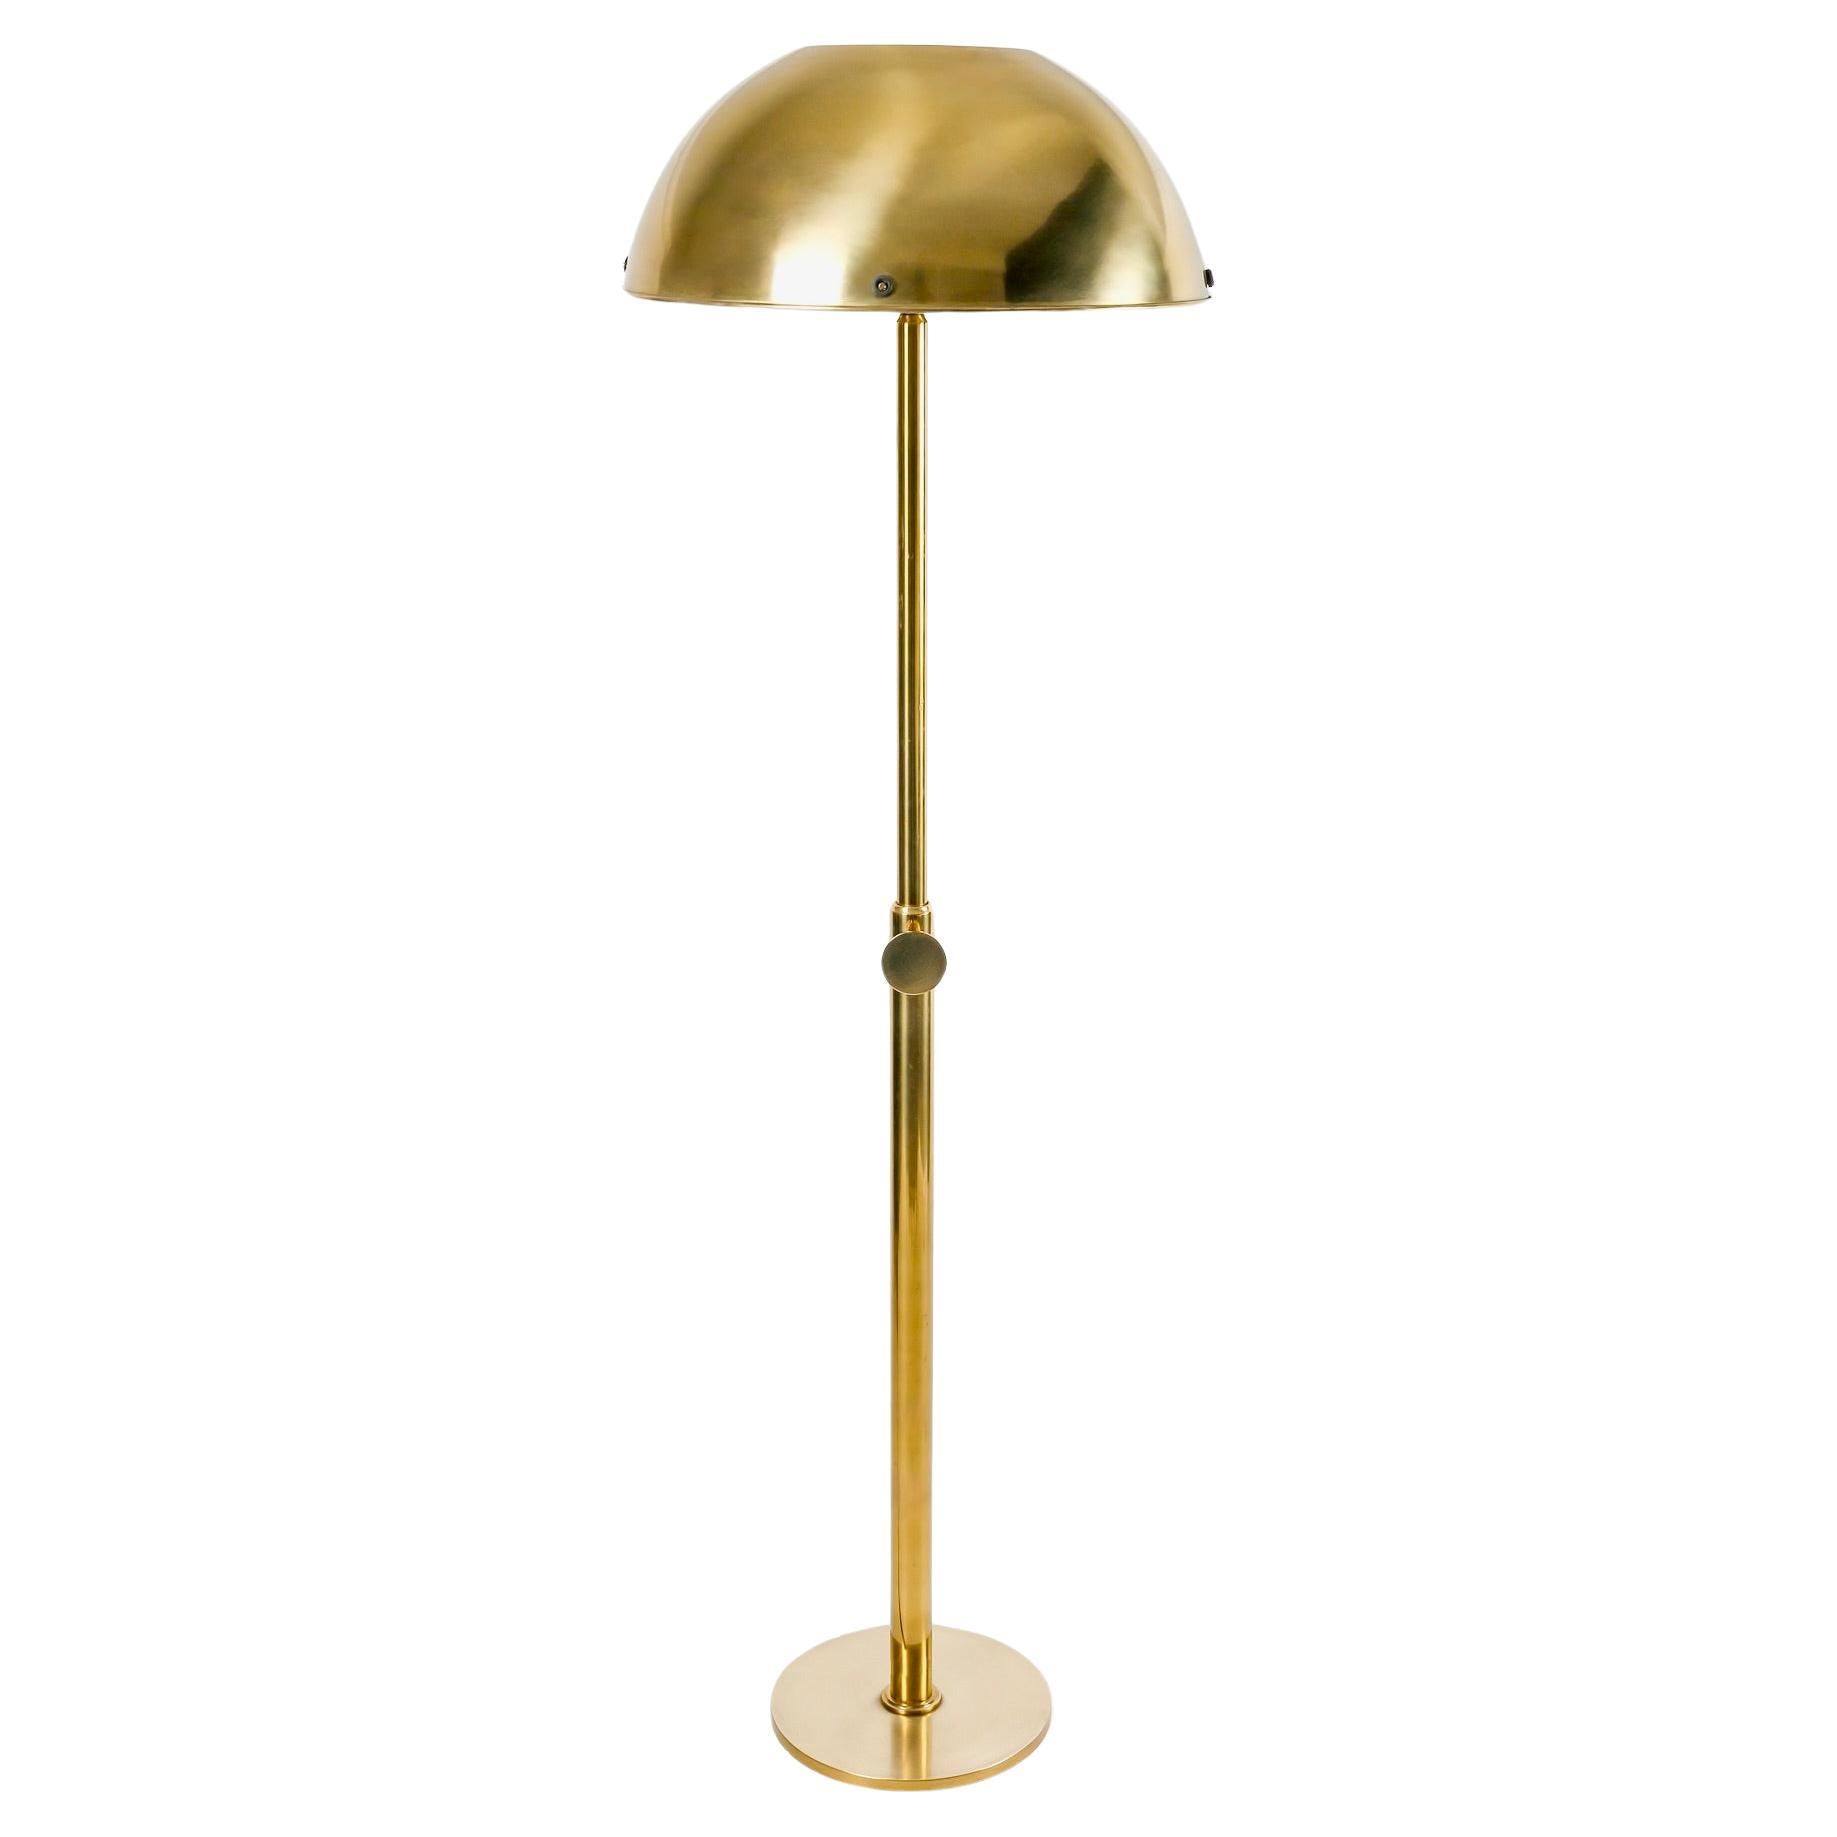 High-quality, beautifully designed floor lamp

Composed of a cylindrical central rod in gilded brass, formed by two interlocking rods of different diameters, allowing the height of the floor lamp to be adjusted by means of a round knob located at